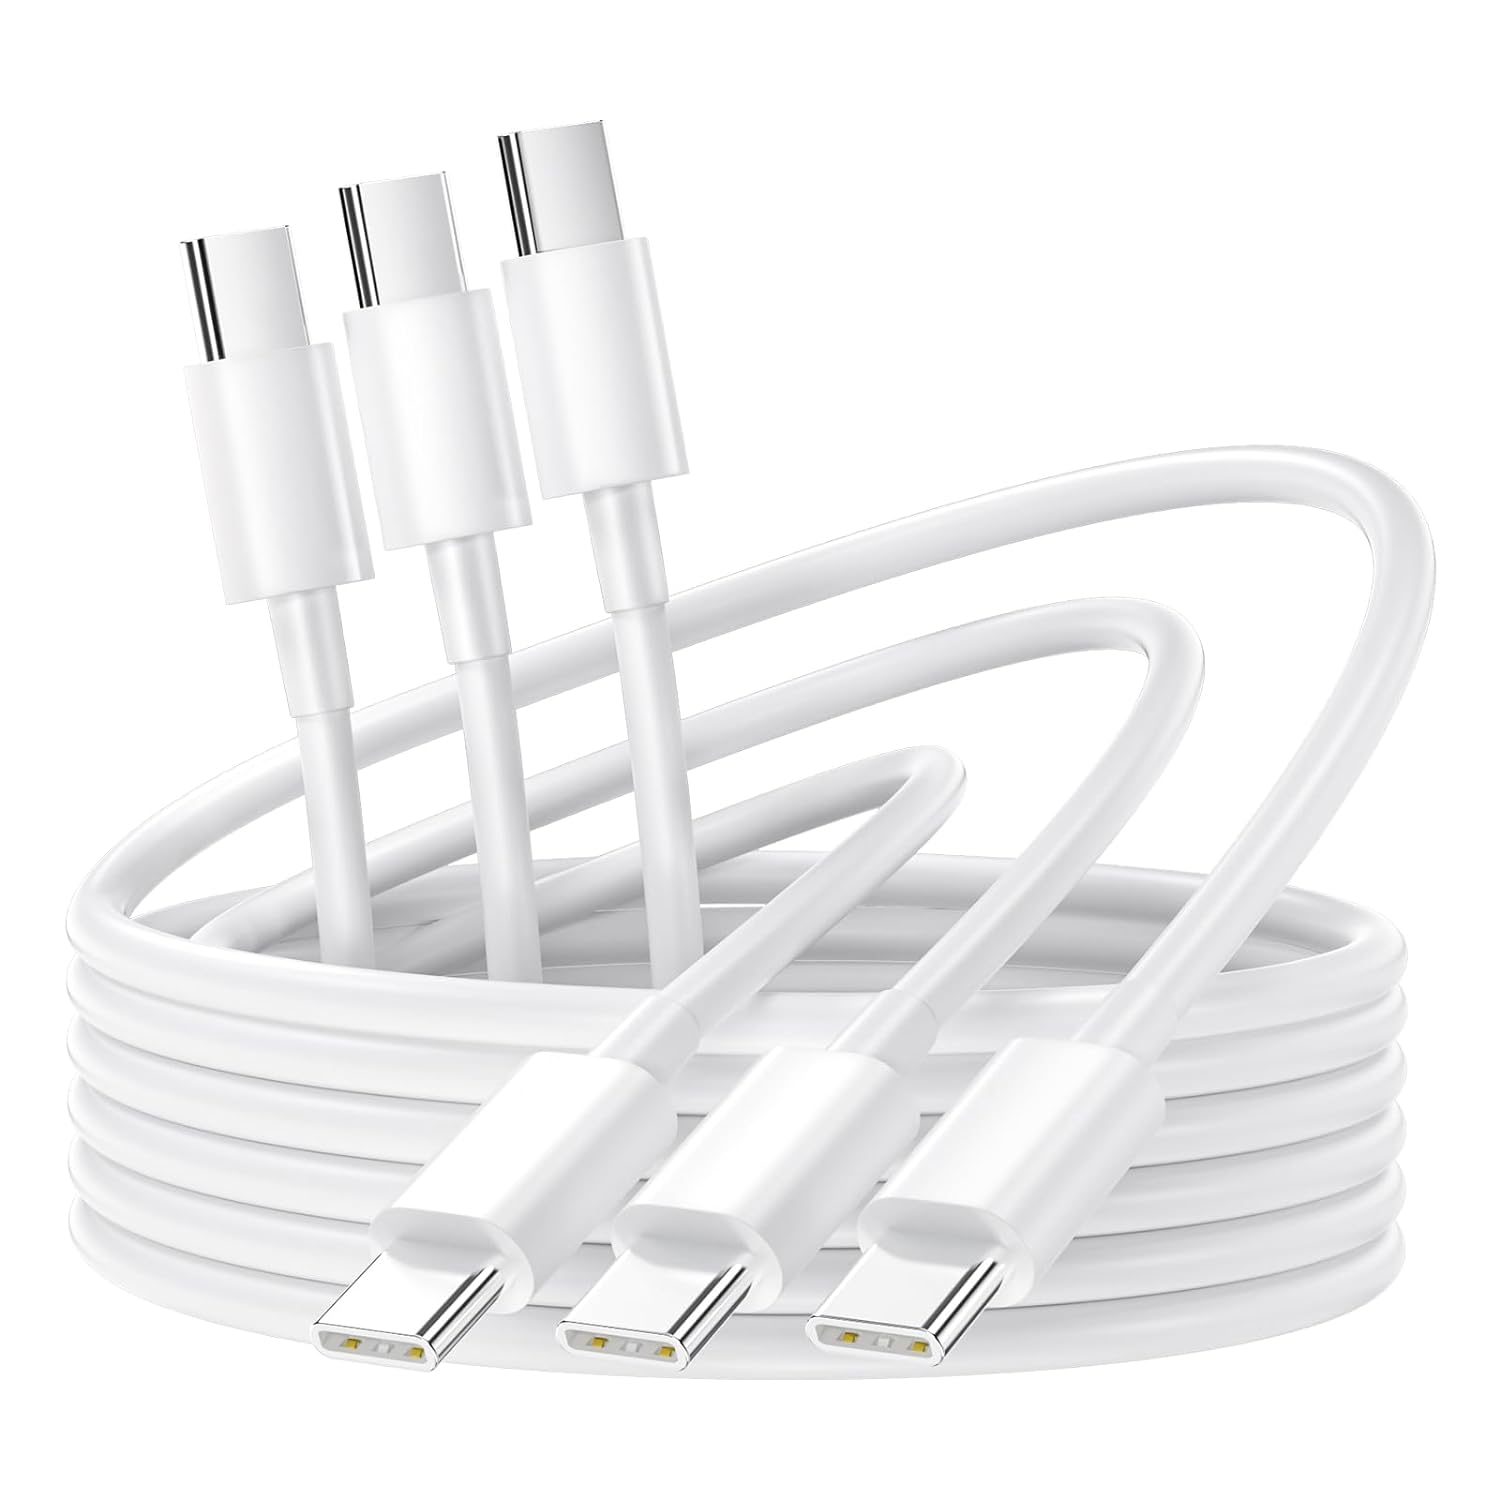 3-Pack USB C Cable 6.6ft 3A/60W, Type C Fast Charger Cable